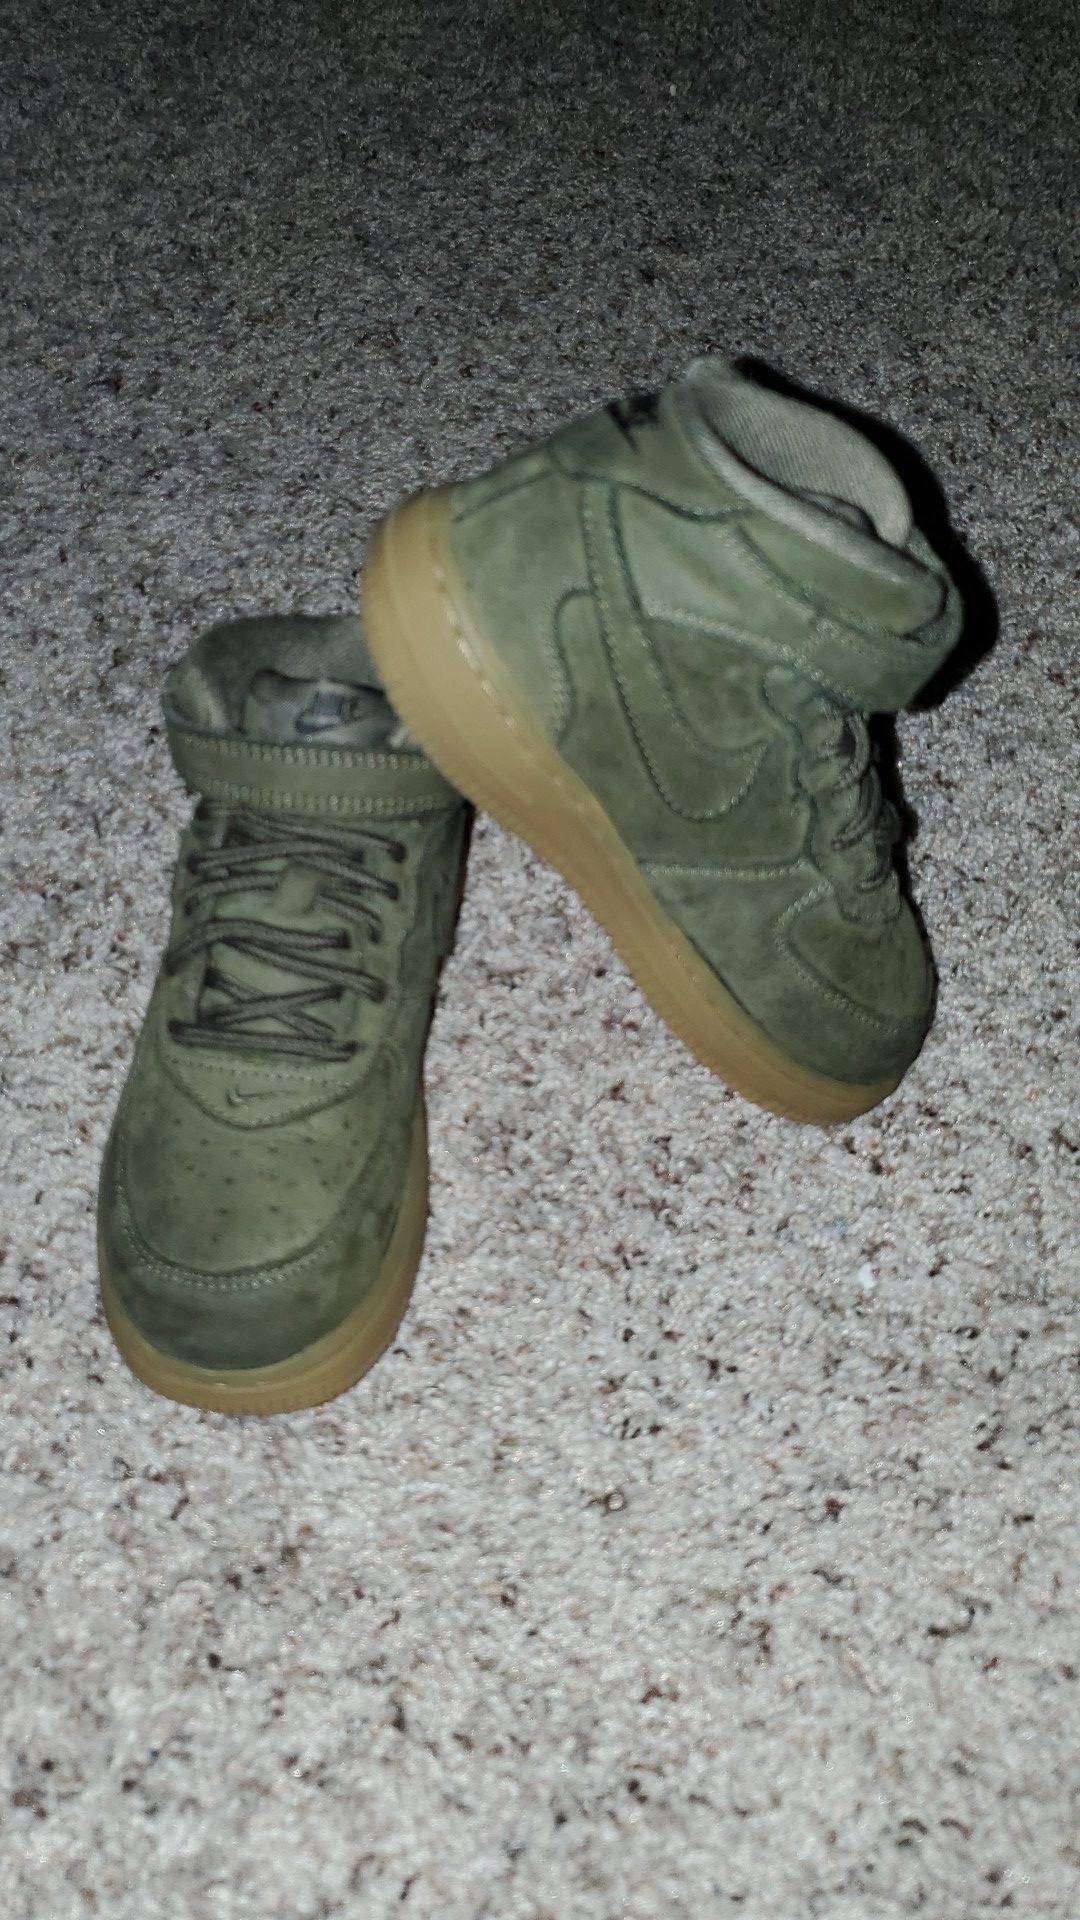 *SHIPS ONLY* NIKE AIR FORCE 1 MID LV8 SIZE 10C KIDS GREEN SUEDE HIGH TOP TENNIS SHOES